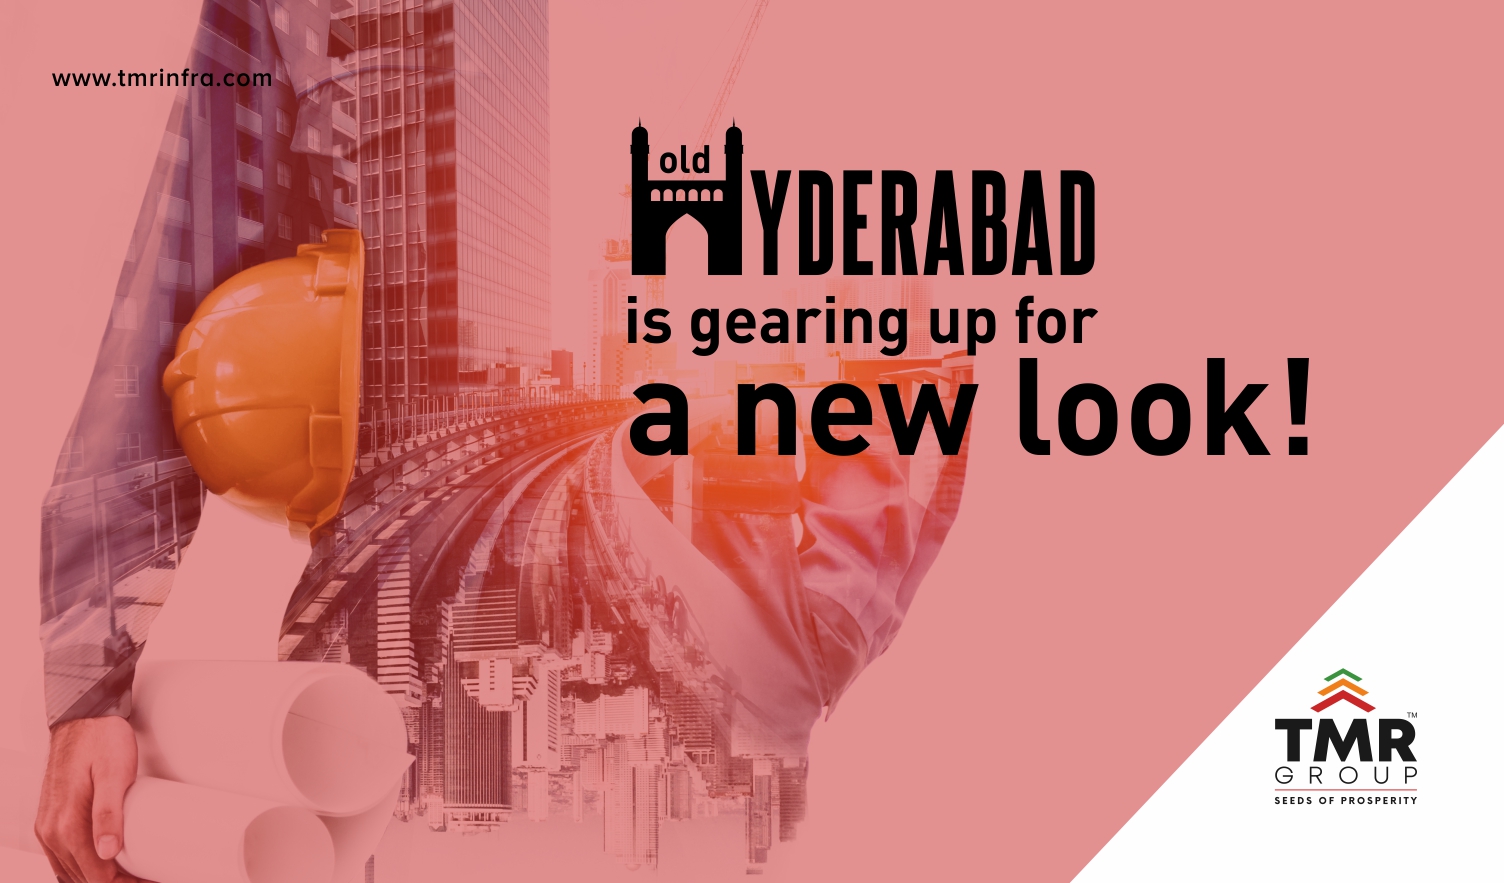 TMR: Old Hyderabad is gearing up for a new look! - Blogs